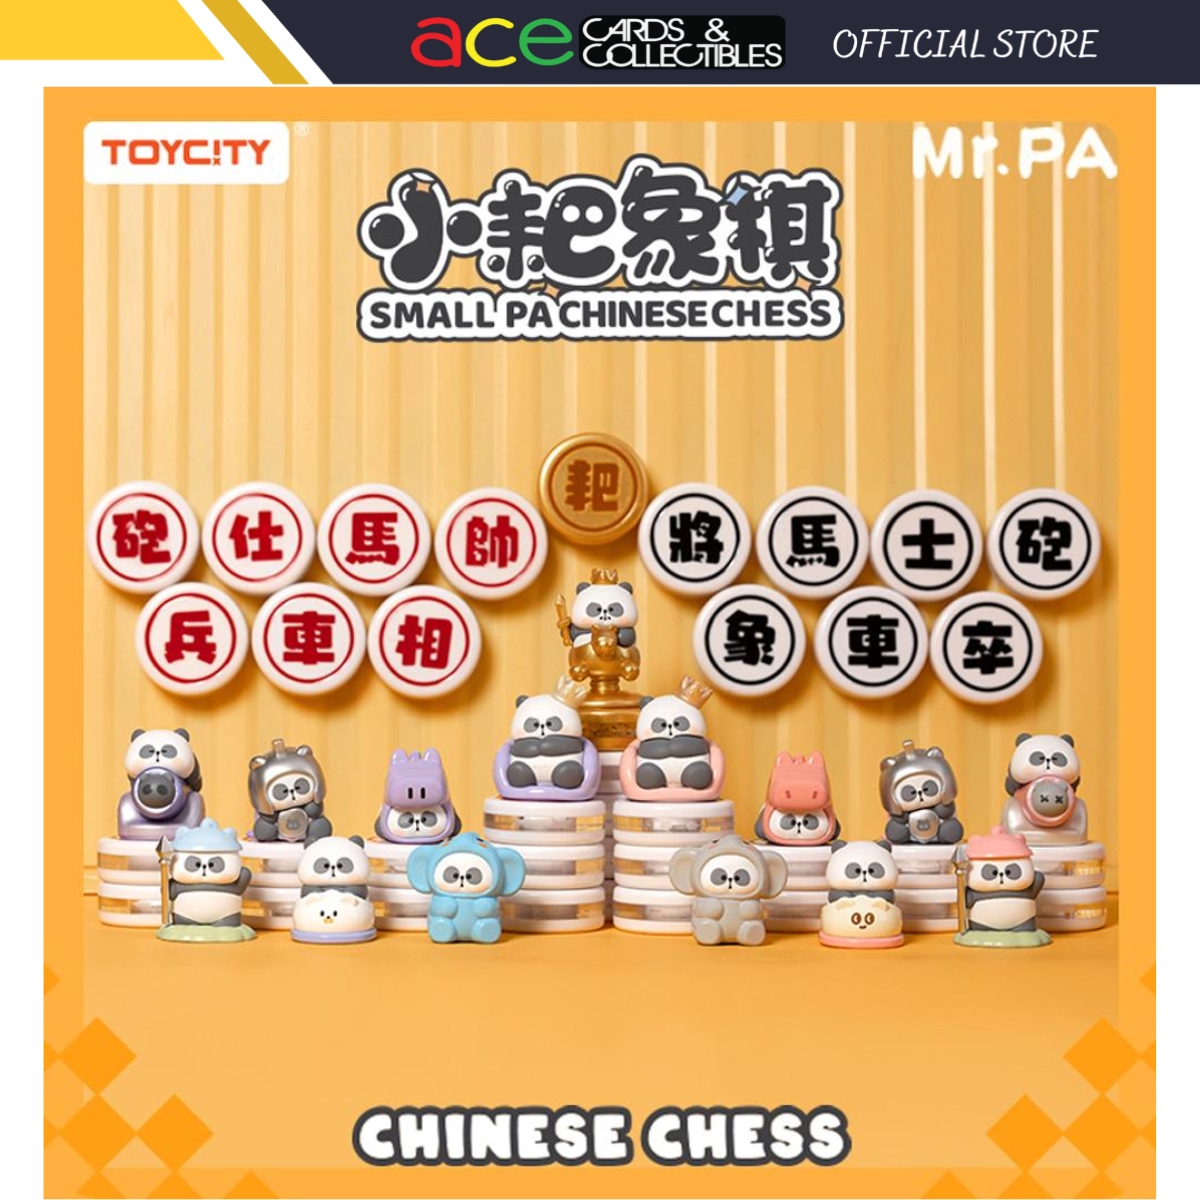 Toy City x Mr. Pa Small Pa Chinese Chess Series-Single Box (Random)-ToyC!ty-Ace Cards & Collectibles